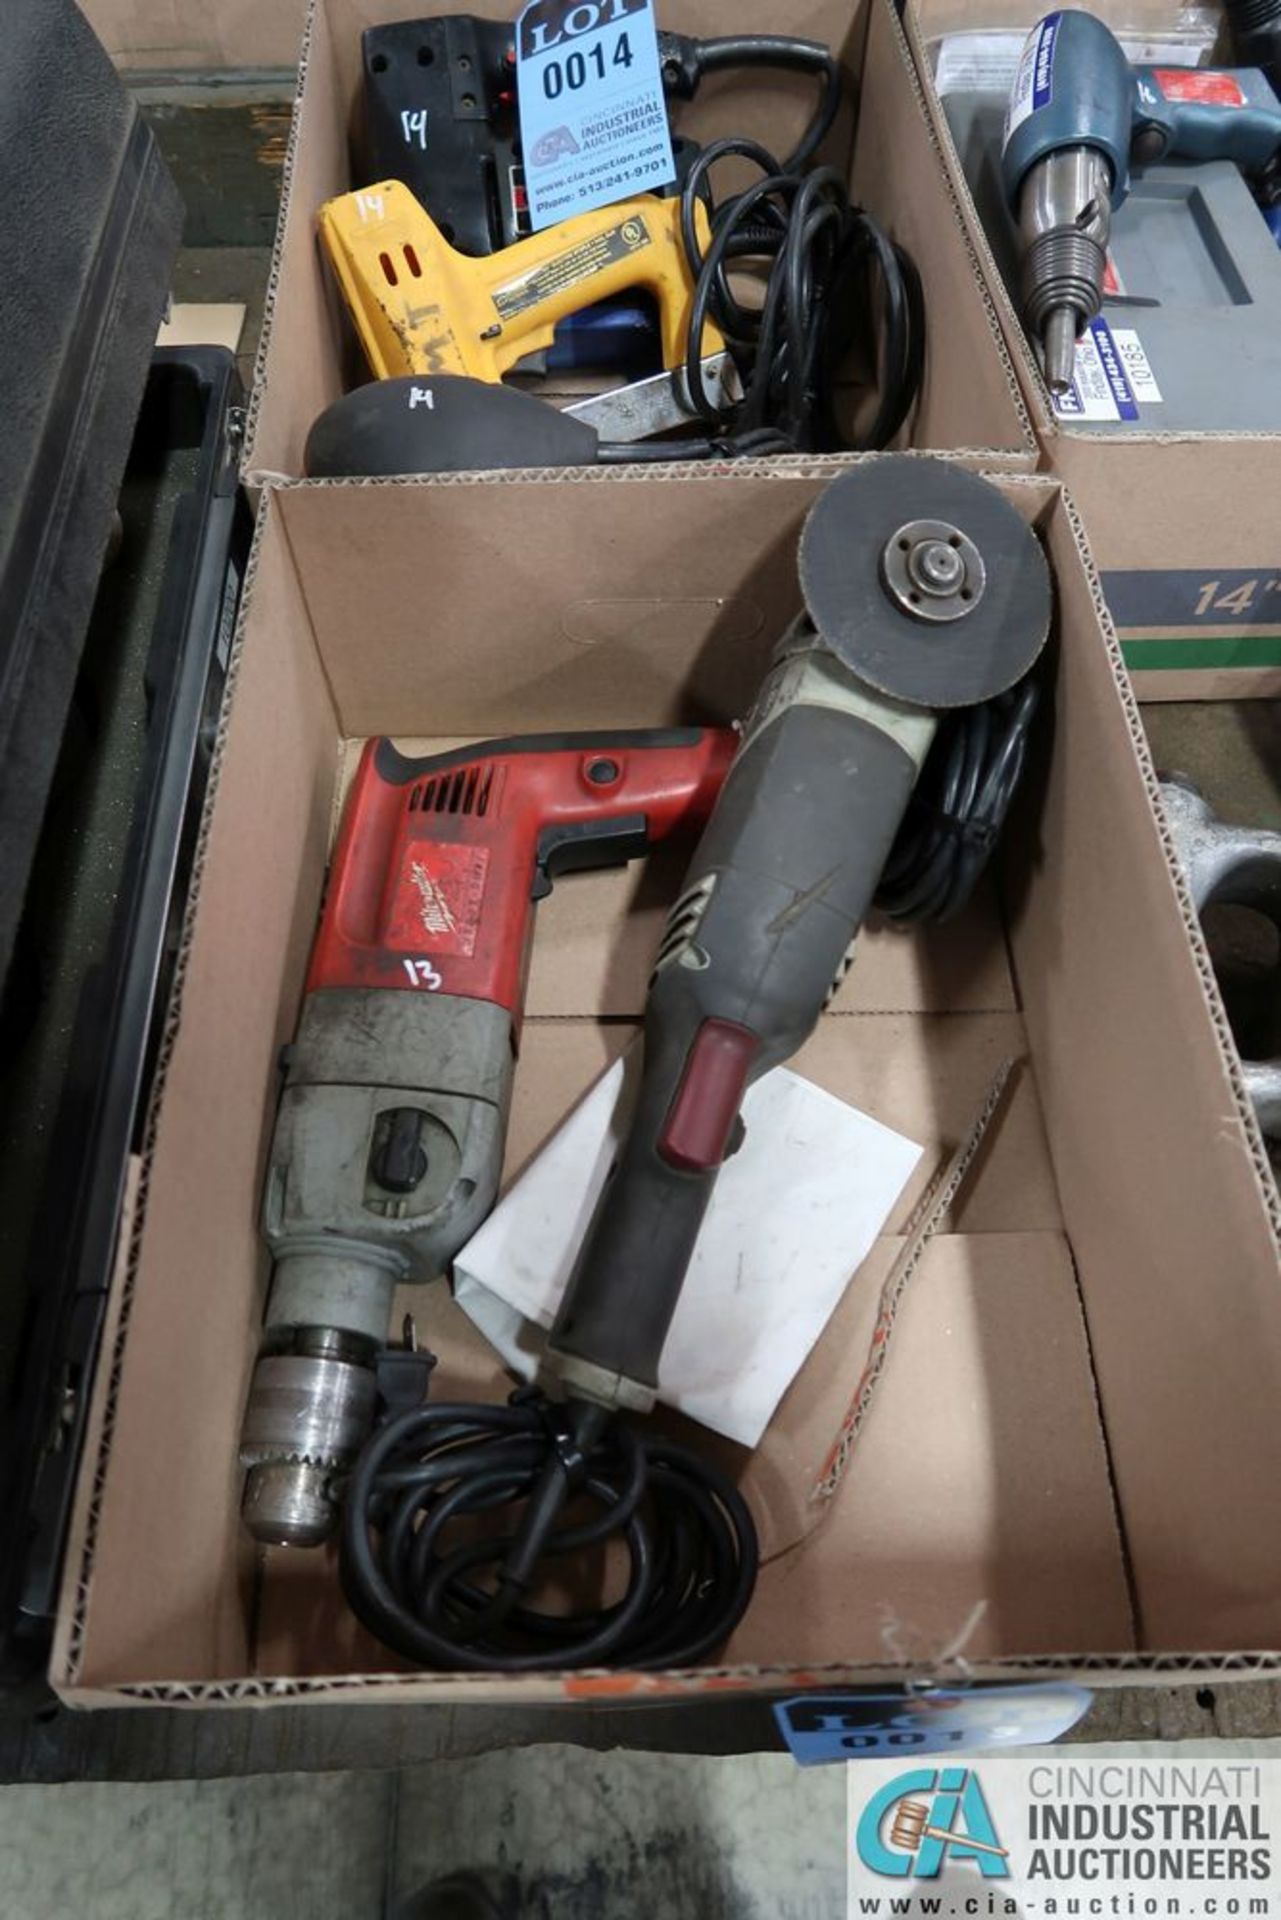 (LOT) 1/2" MILWAUKEE ELECTRIC DRILL AND TASK FORCE ANGLE GRINDER